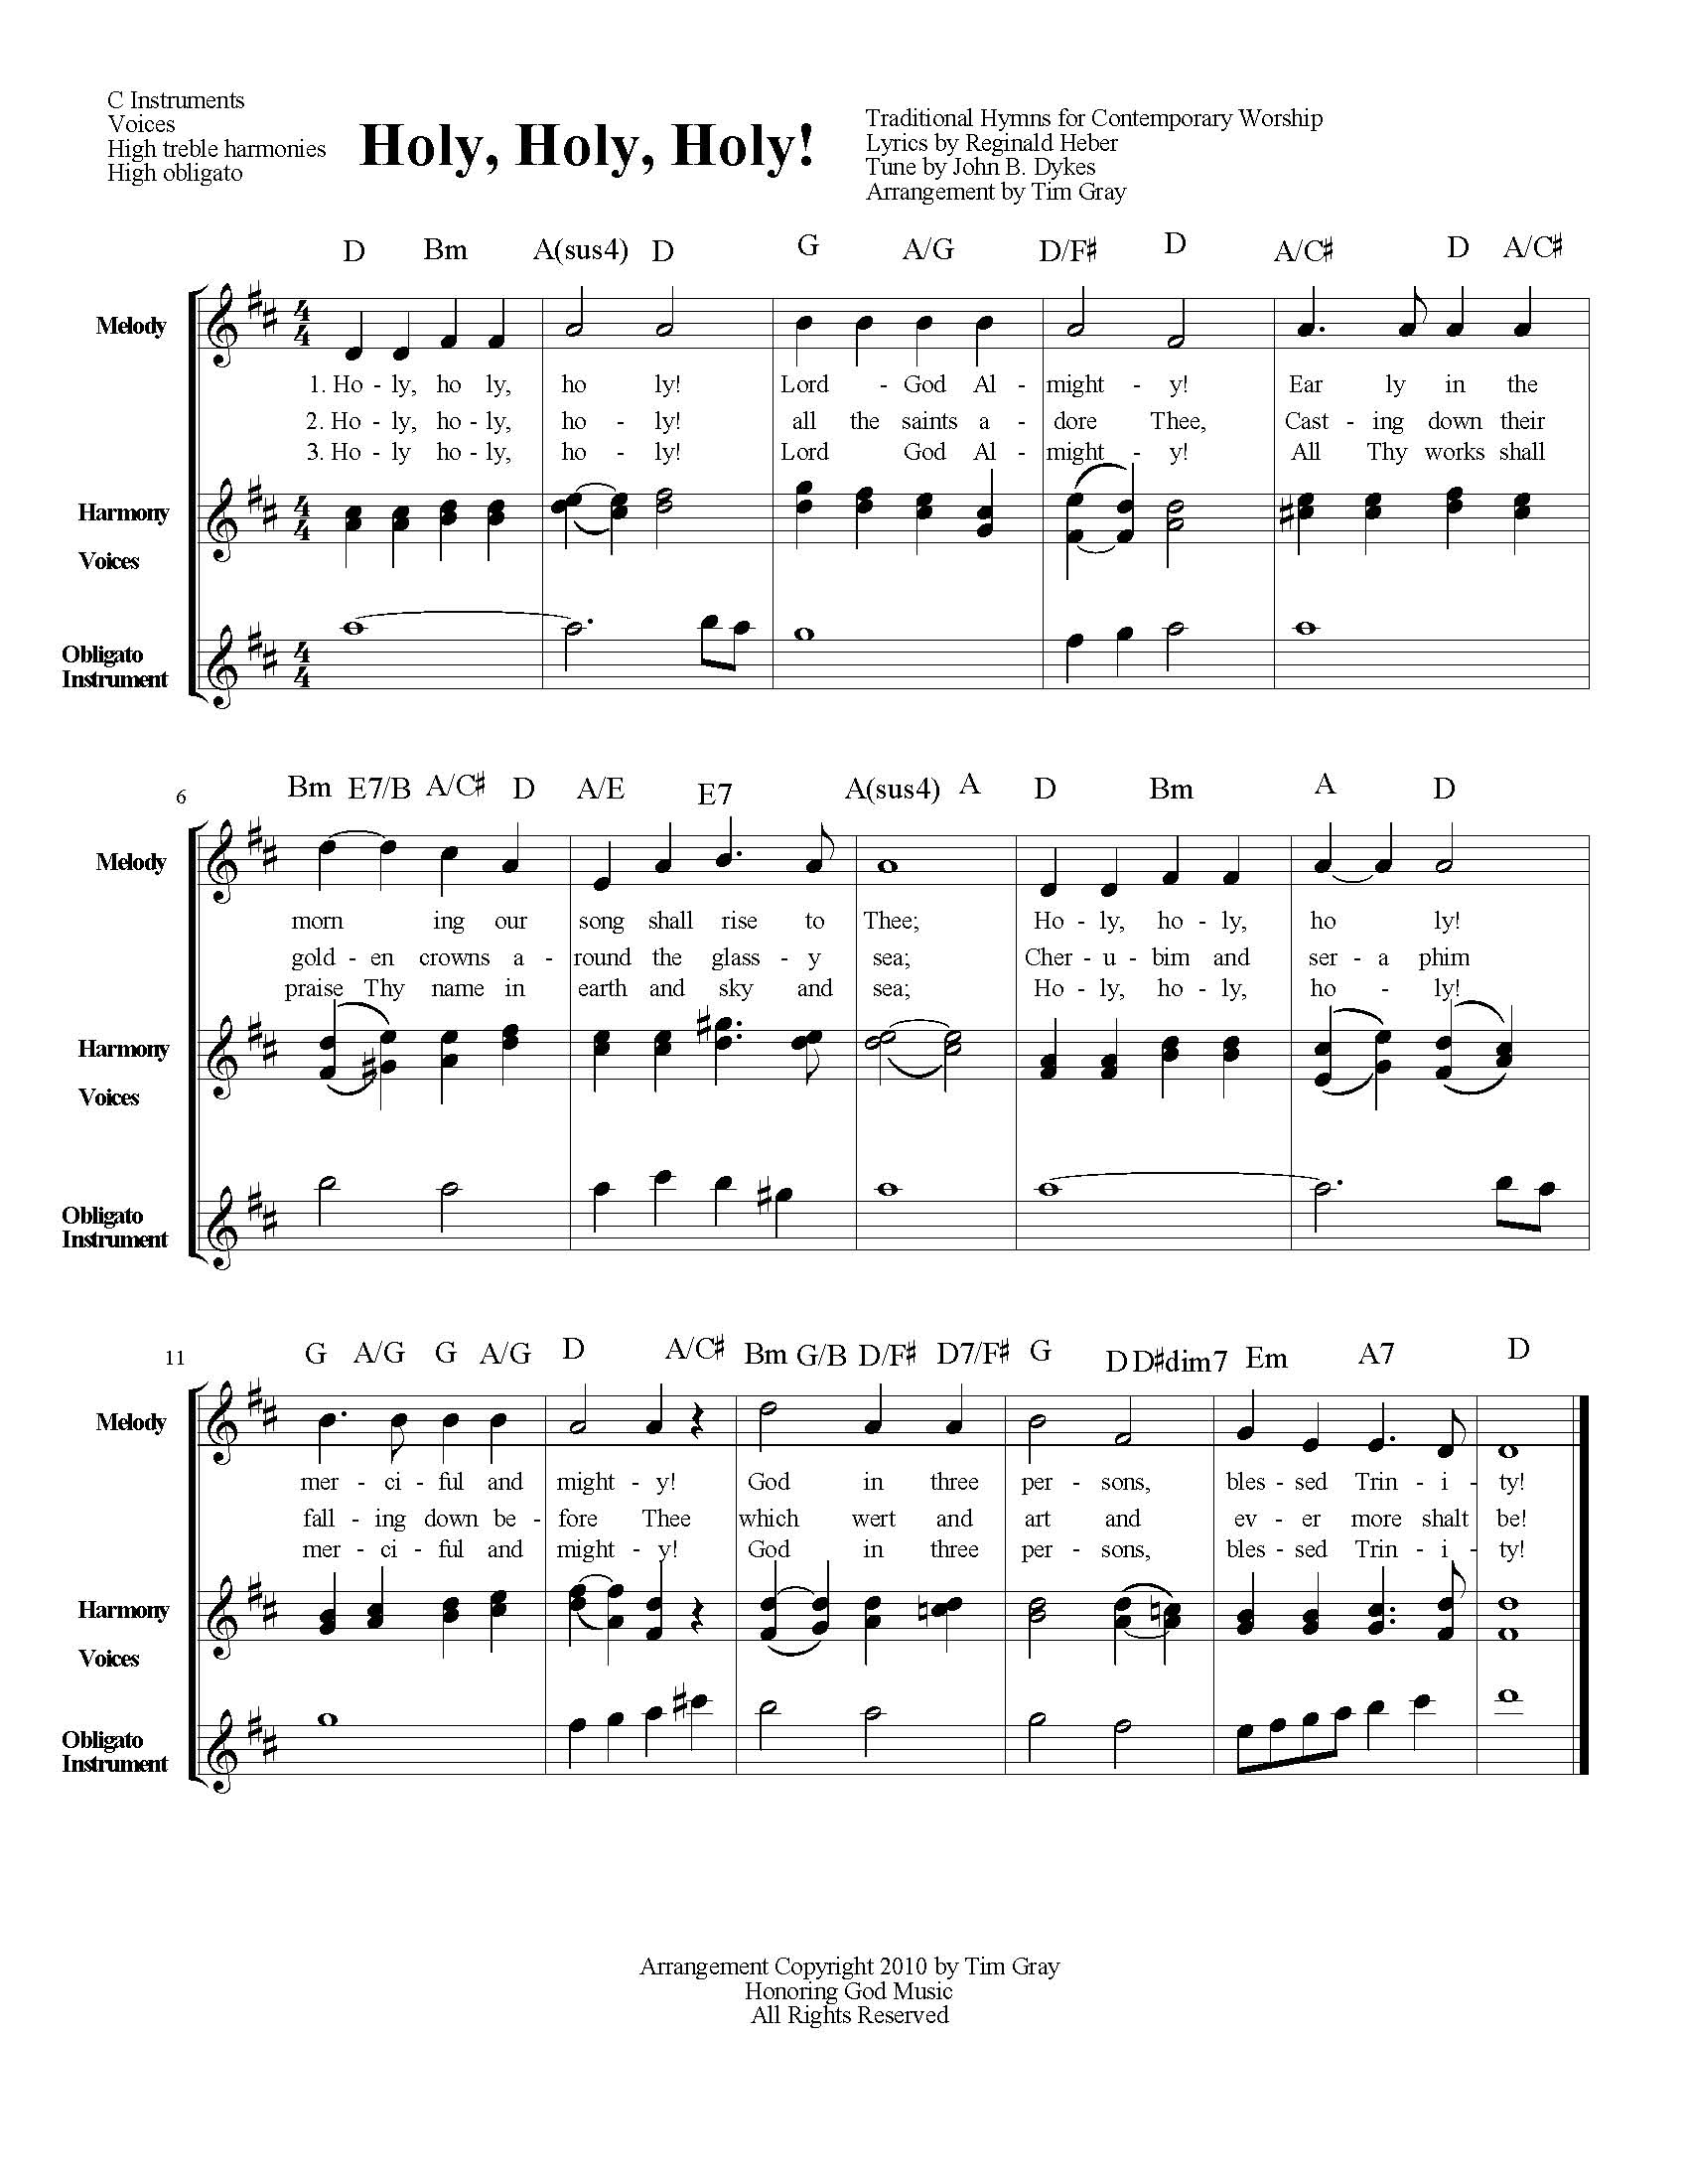 Holy, Holy, Holy! TH4CW Traditional Hymns for Contemporary Worship sample page on HonoringGodMusic.com